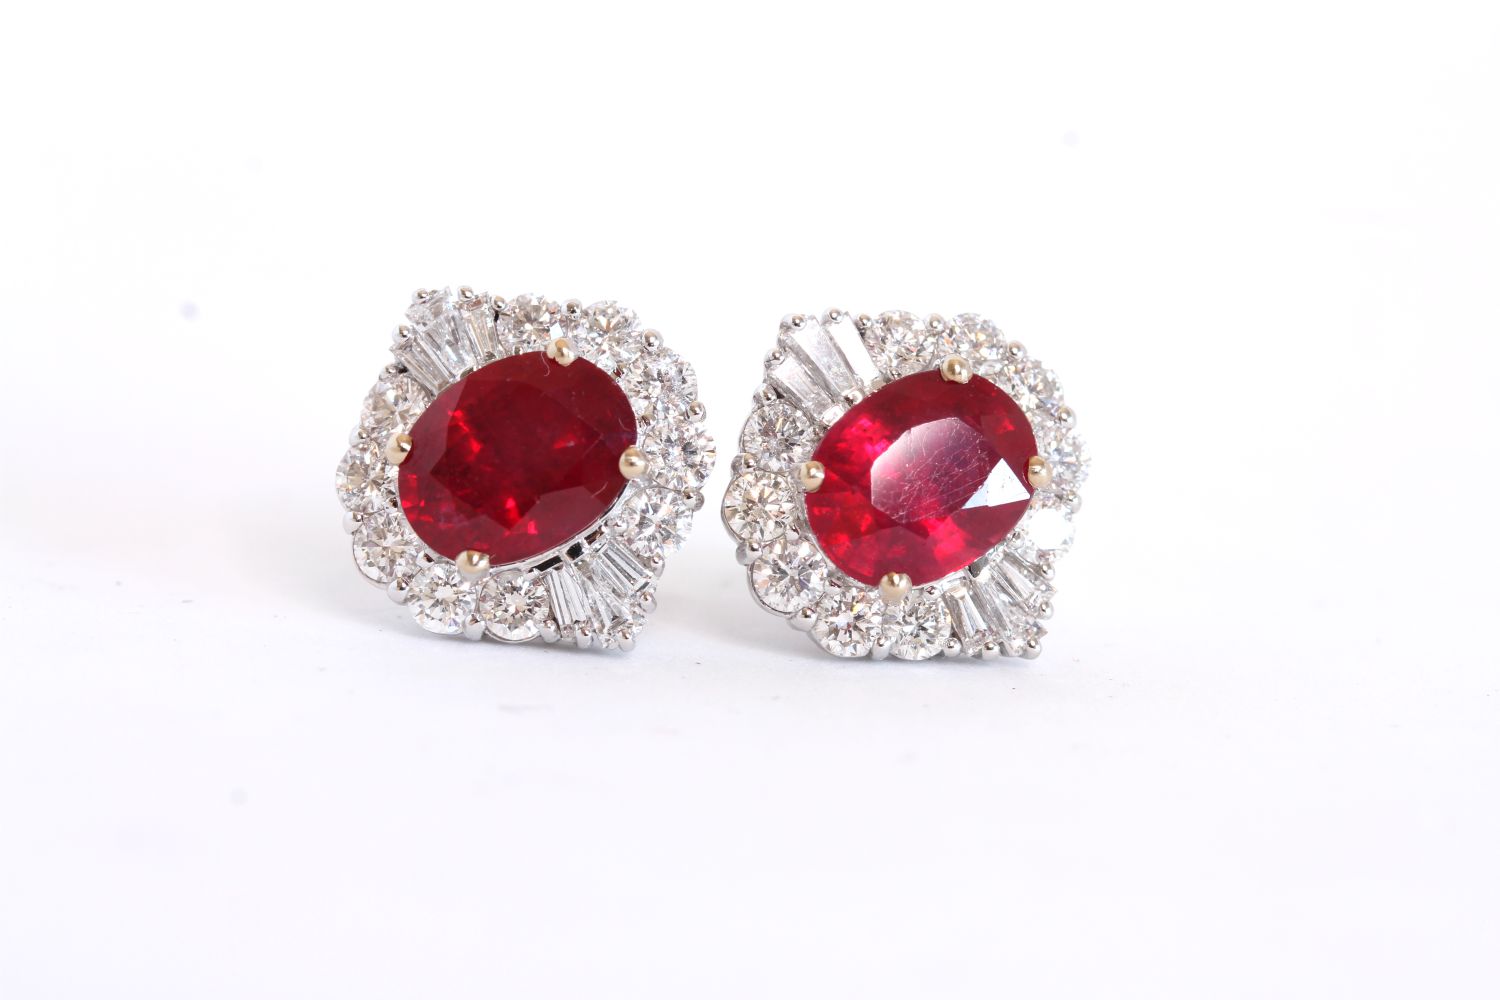 Treated Ruby and Diamond Cluster Stud Earrings - Image 3 of 3